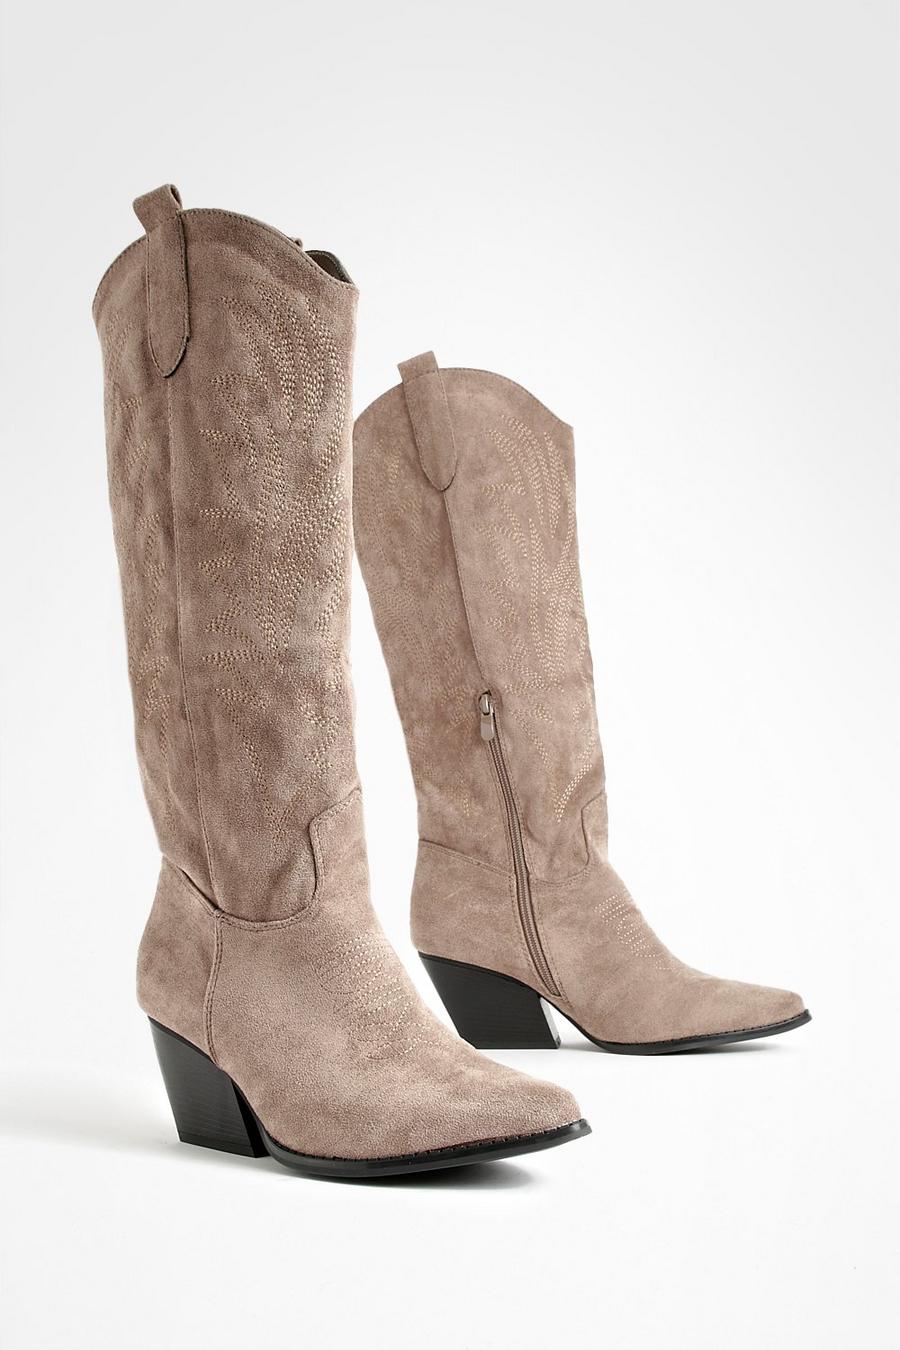 Taupe beige Embroidered Knee High Western Cowboy Boots  